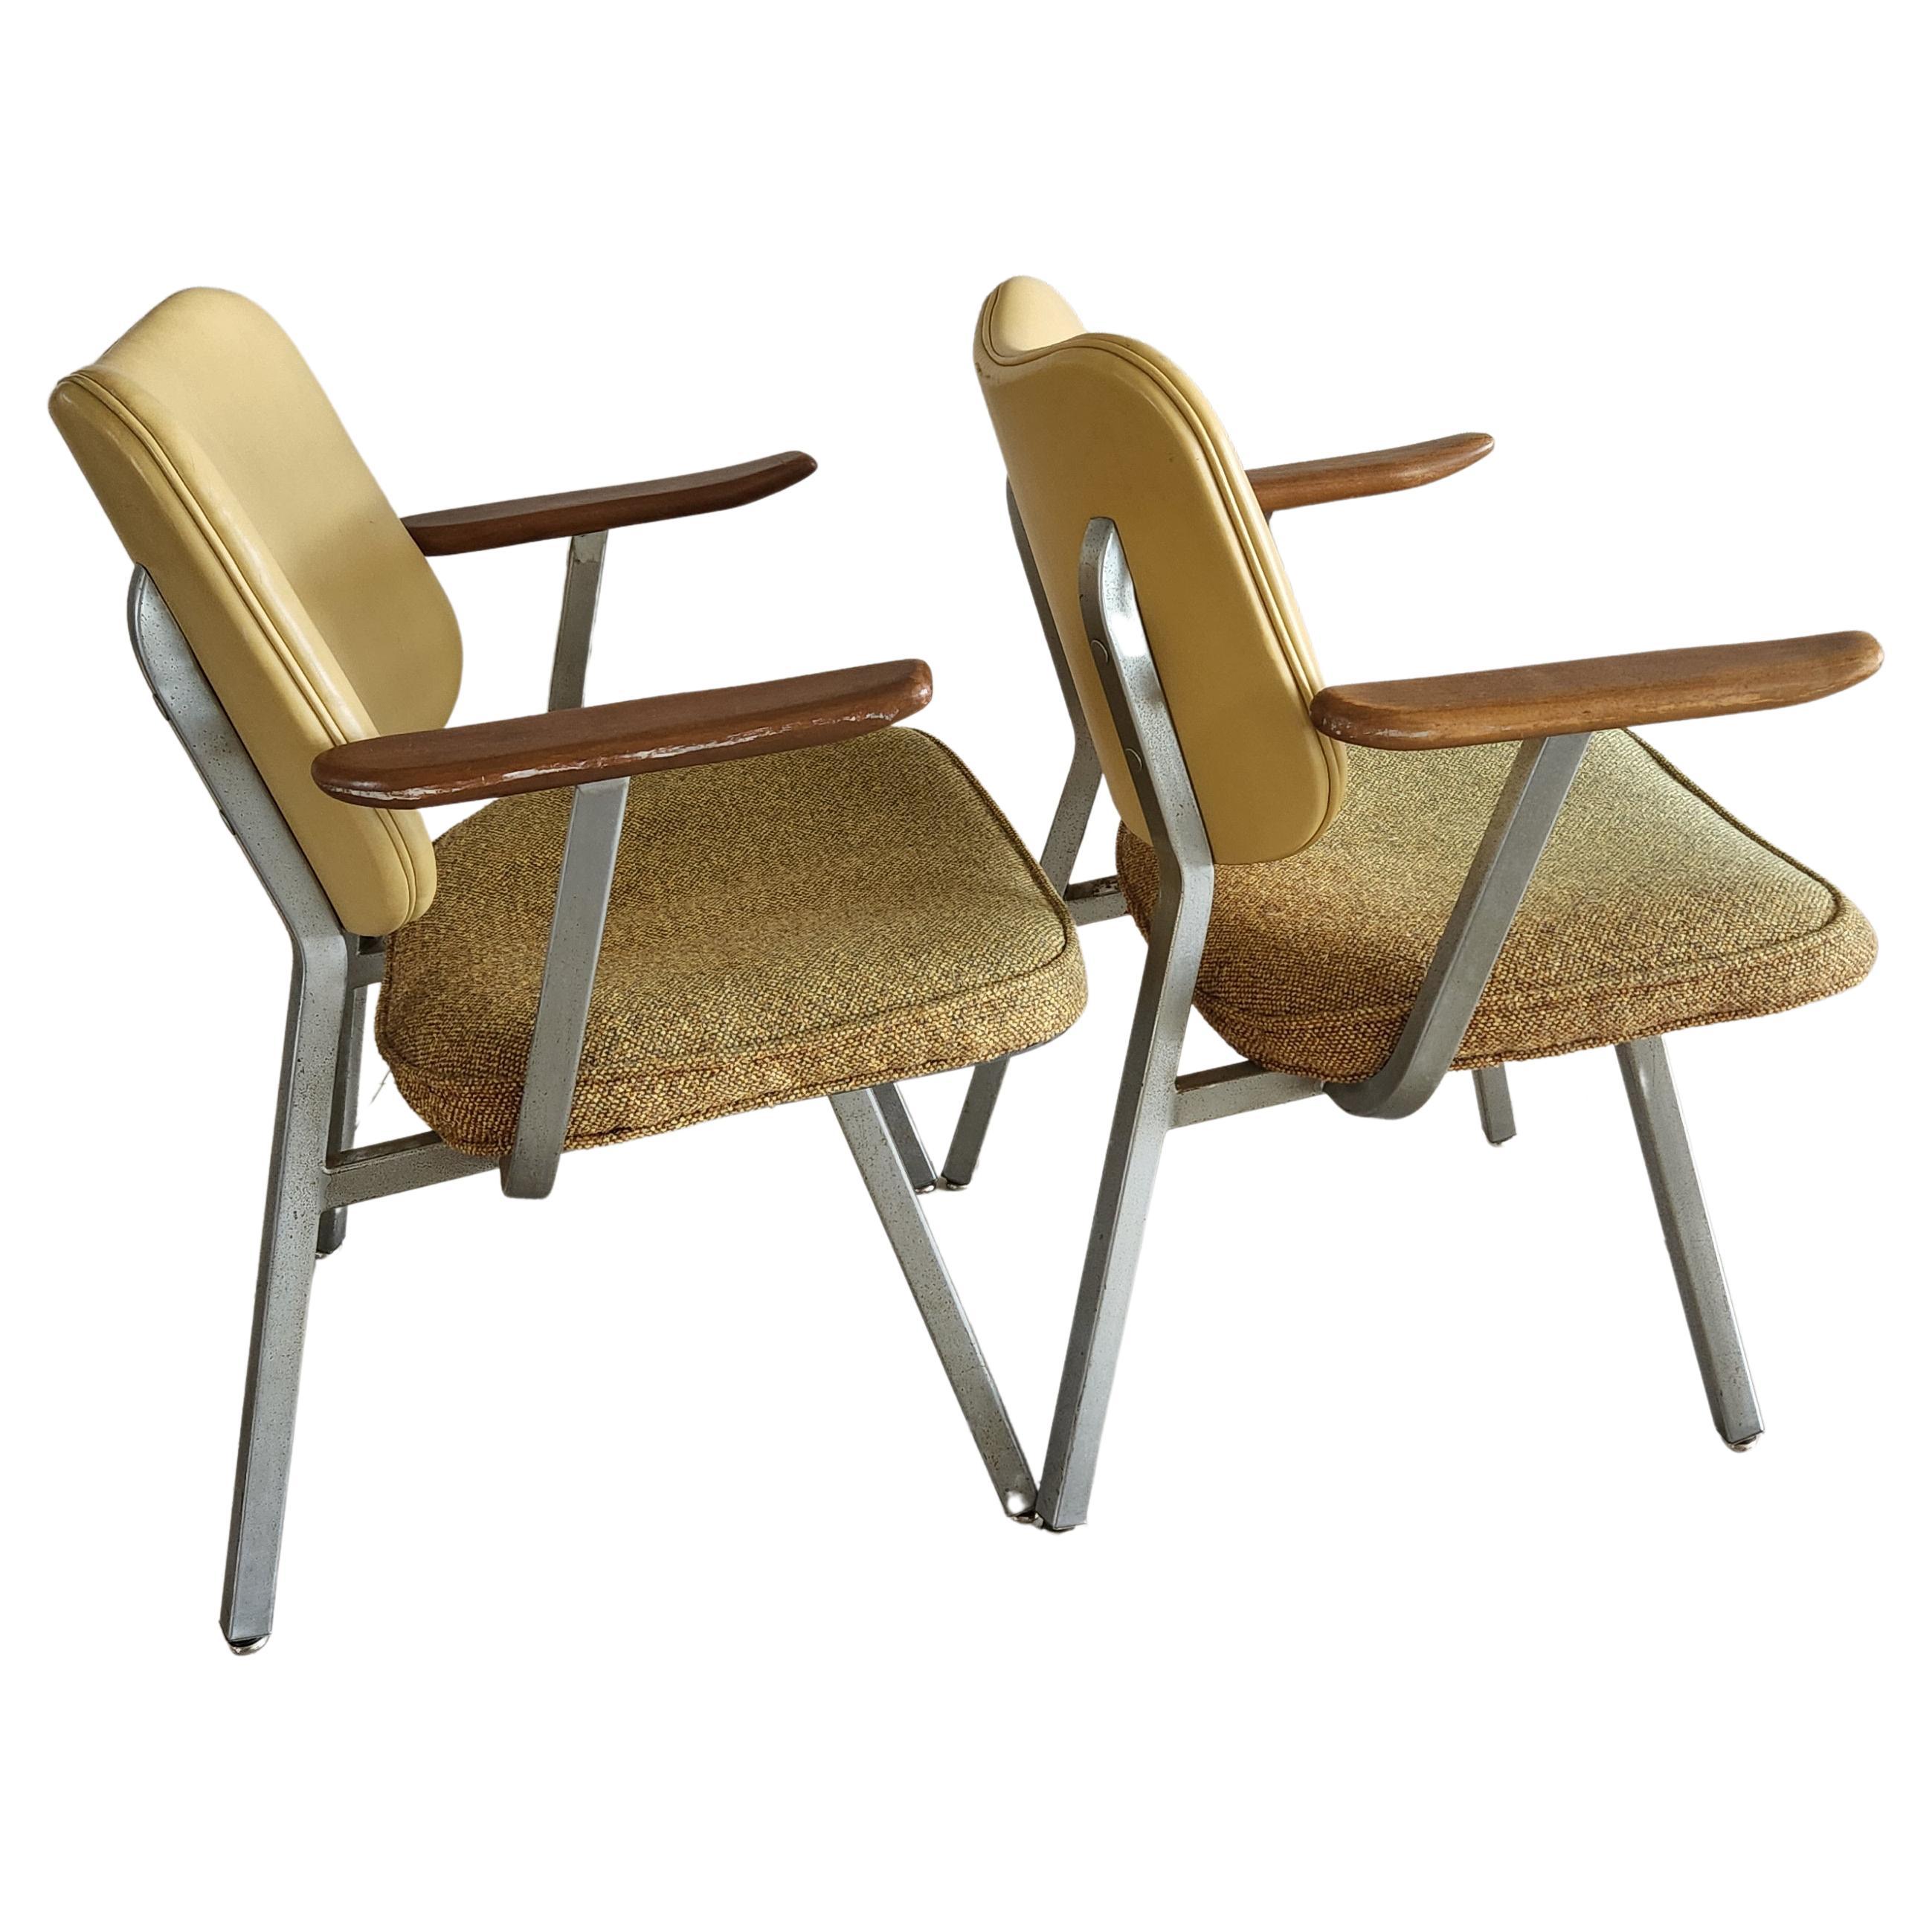 Streamline Modern Industrial Armchairs Vinyl & Tweed
Metal frame steel and aluminum Walnut Wood arms.
Made by Royal Metal. 
Design style of Alfons Bach and Donald Deskey for Royal Metal
Scooped backs and square tubular steel make for outstanding